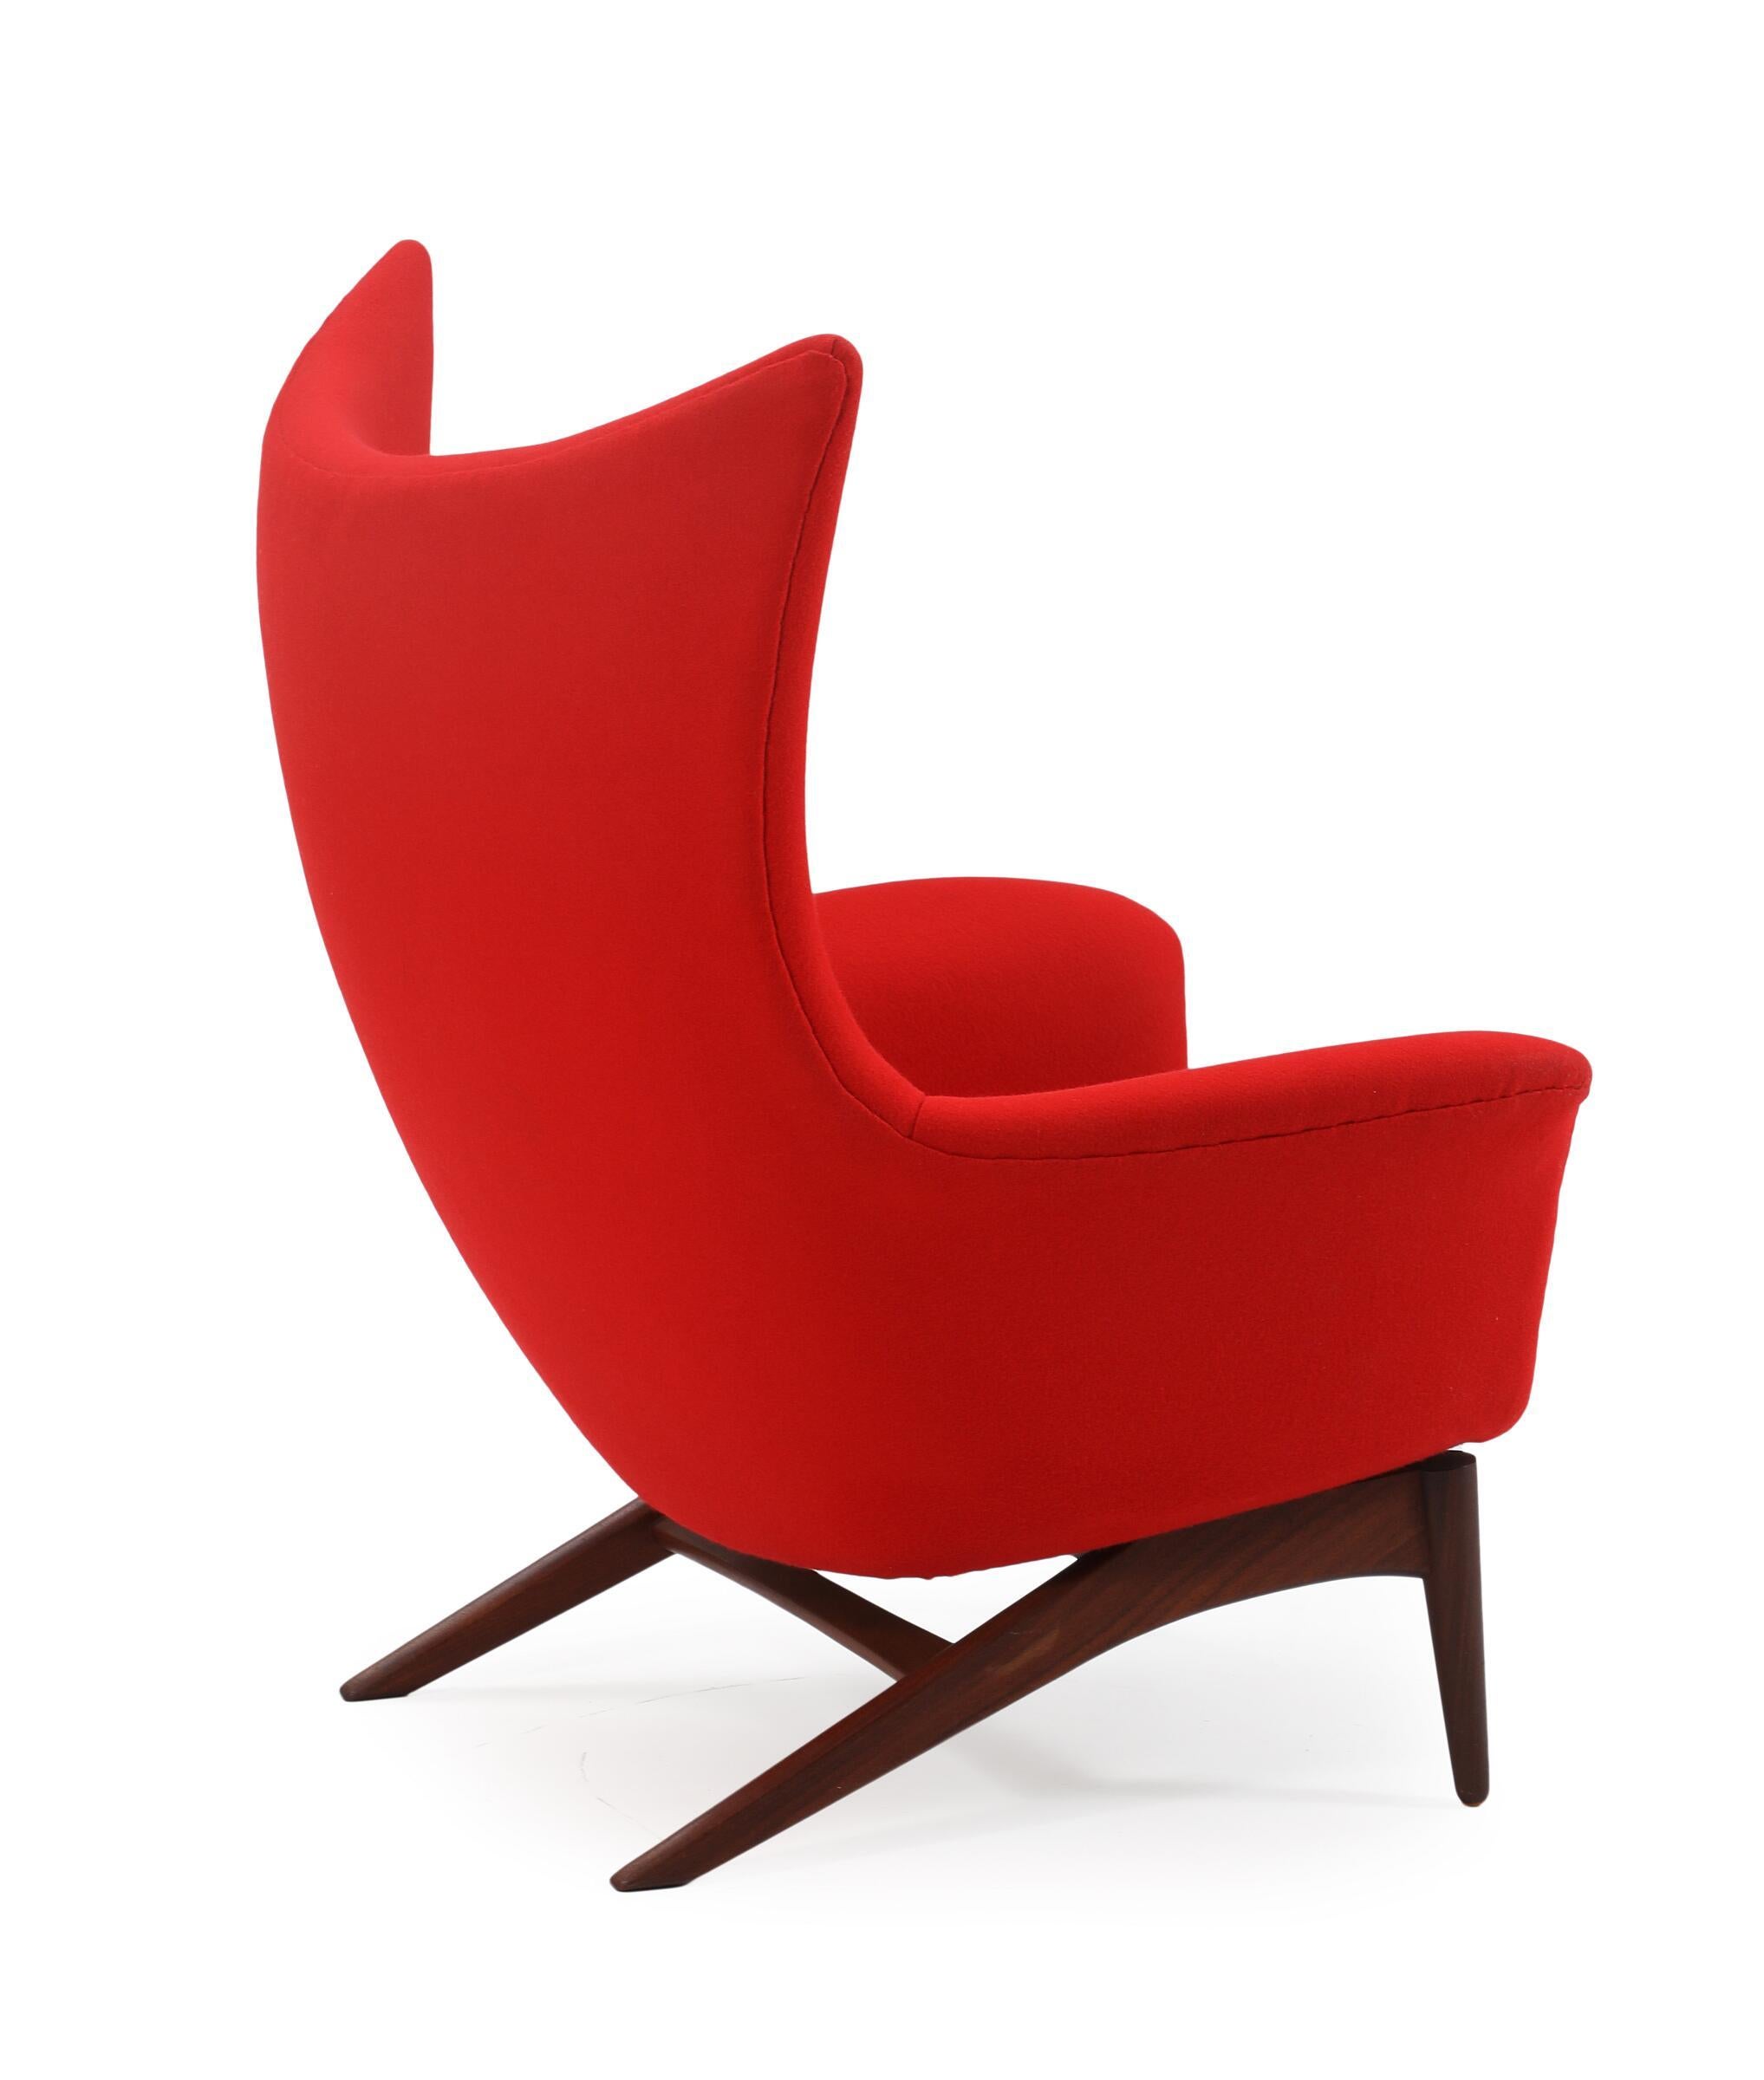 Henry W. Klein. Easy chair with teak rocking frame, upholstered with red wool. Manufactured by NA Jorgensens Mobelfabrik/Bramin. 1960's.

Feel free to request a delivery rate and we will do our best to search for the most reasonable quote.